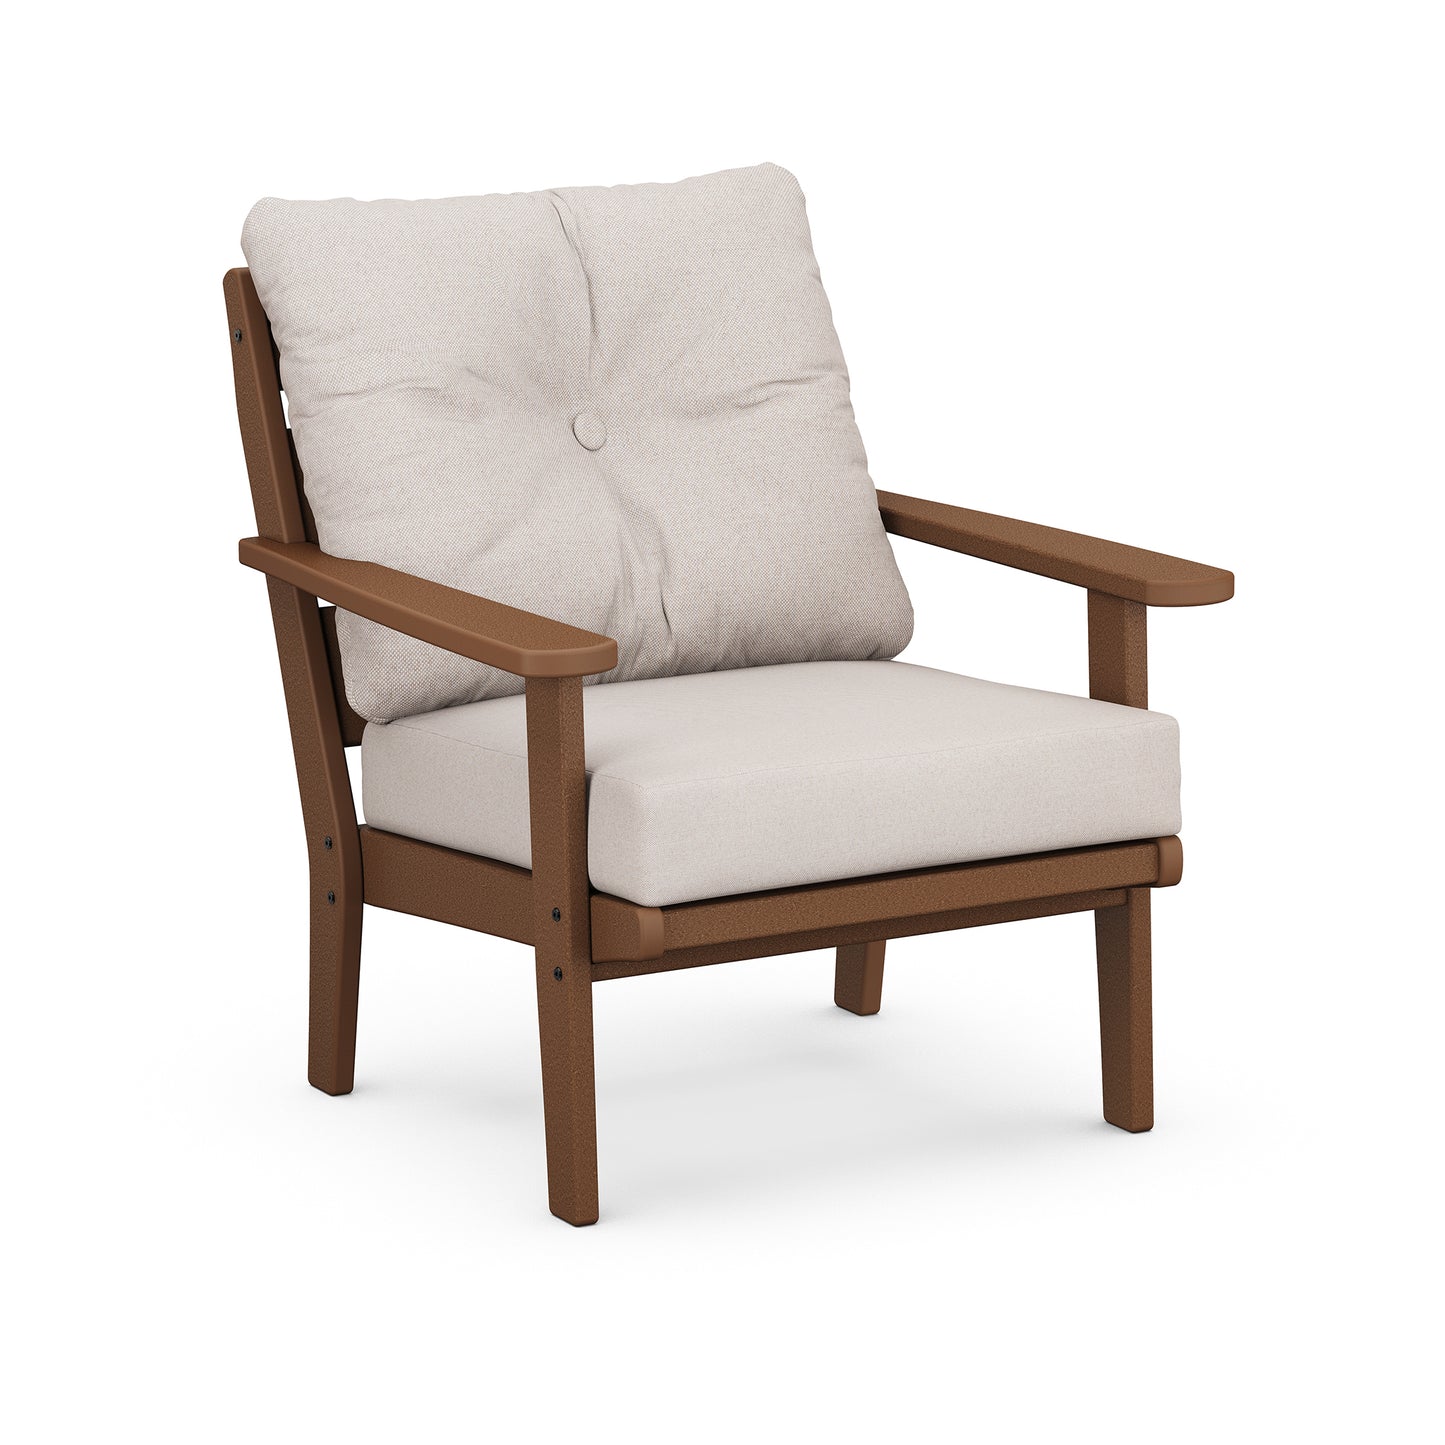 A modern POLYWOOD Lakeside Deep Seating Chair with a wooden frame and thick, cushioned seat and backrest, covered in light beige fabric, shown against a plain white background.